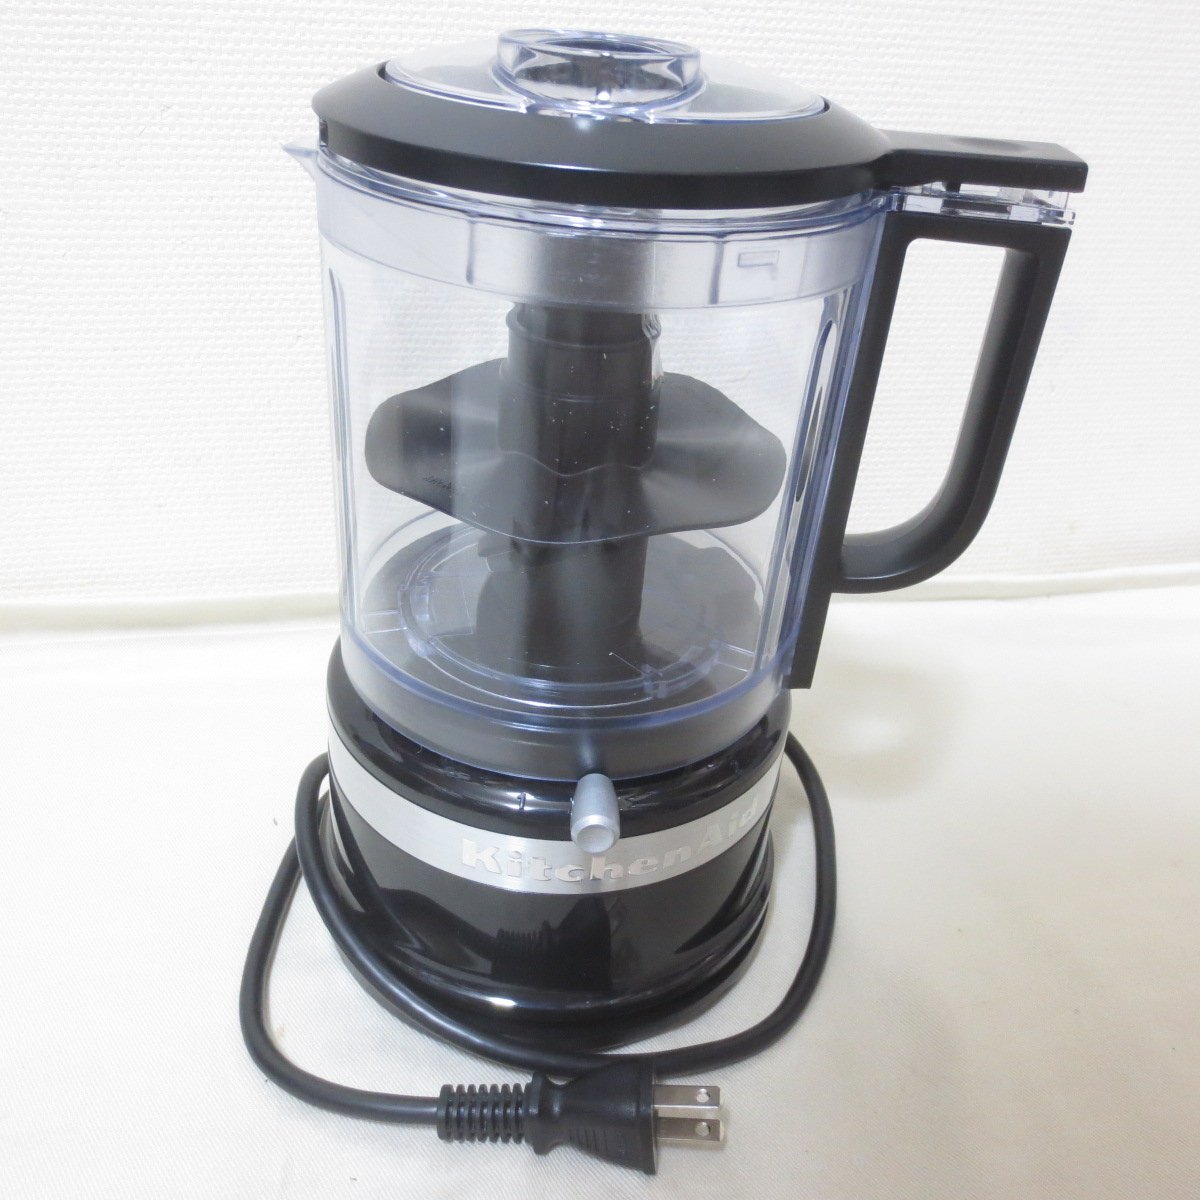 BO03 unused KitchenAid 5C food processor kitchen aid mixer 1.1L black 9KFC0516 cookware [ including in a package ×]